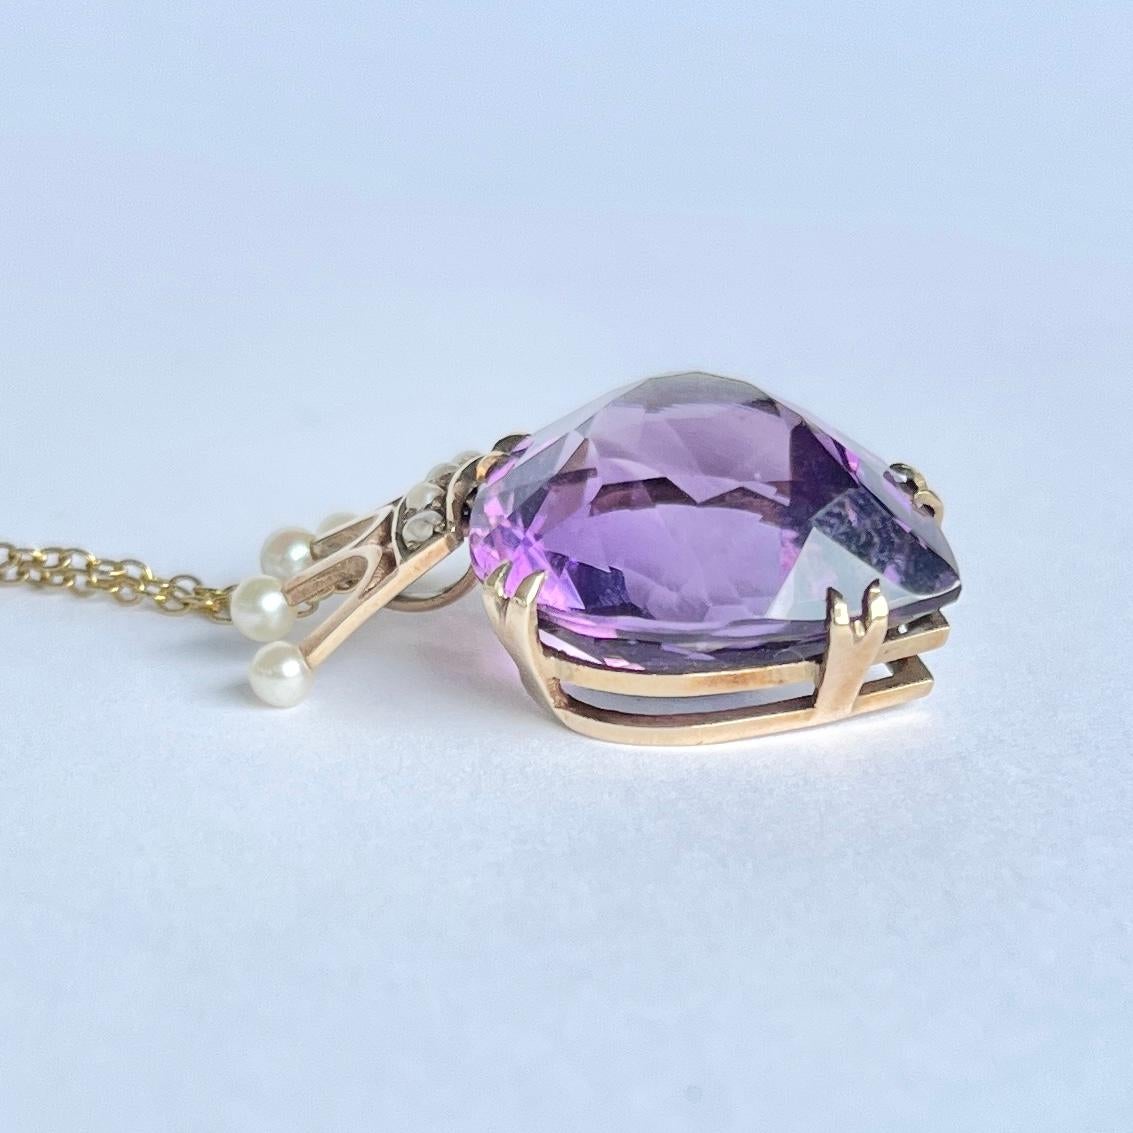 This gorgeous necklace holds a bright purple amethyst stone and a crown holding pearls. A Luckenbooth is a traditional Scottish love token often given as a wedding gift. The heart represents love and the crown is for loyalty. Modelled in 9 carat